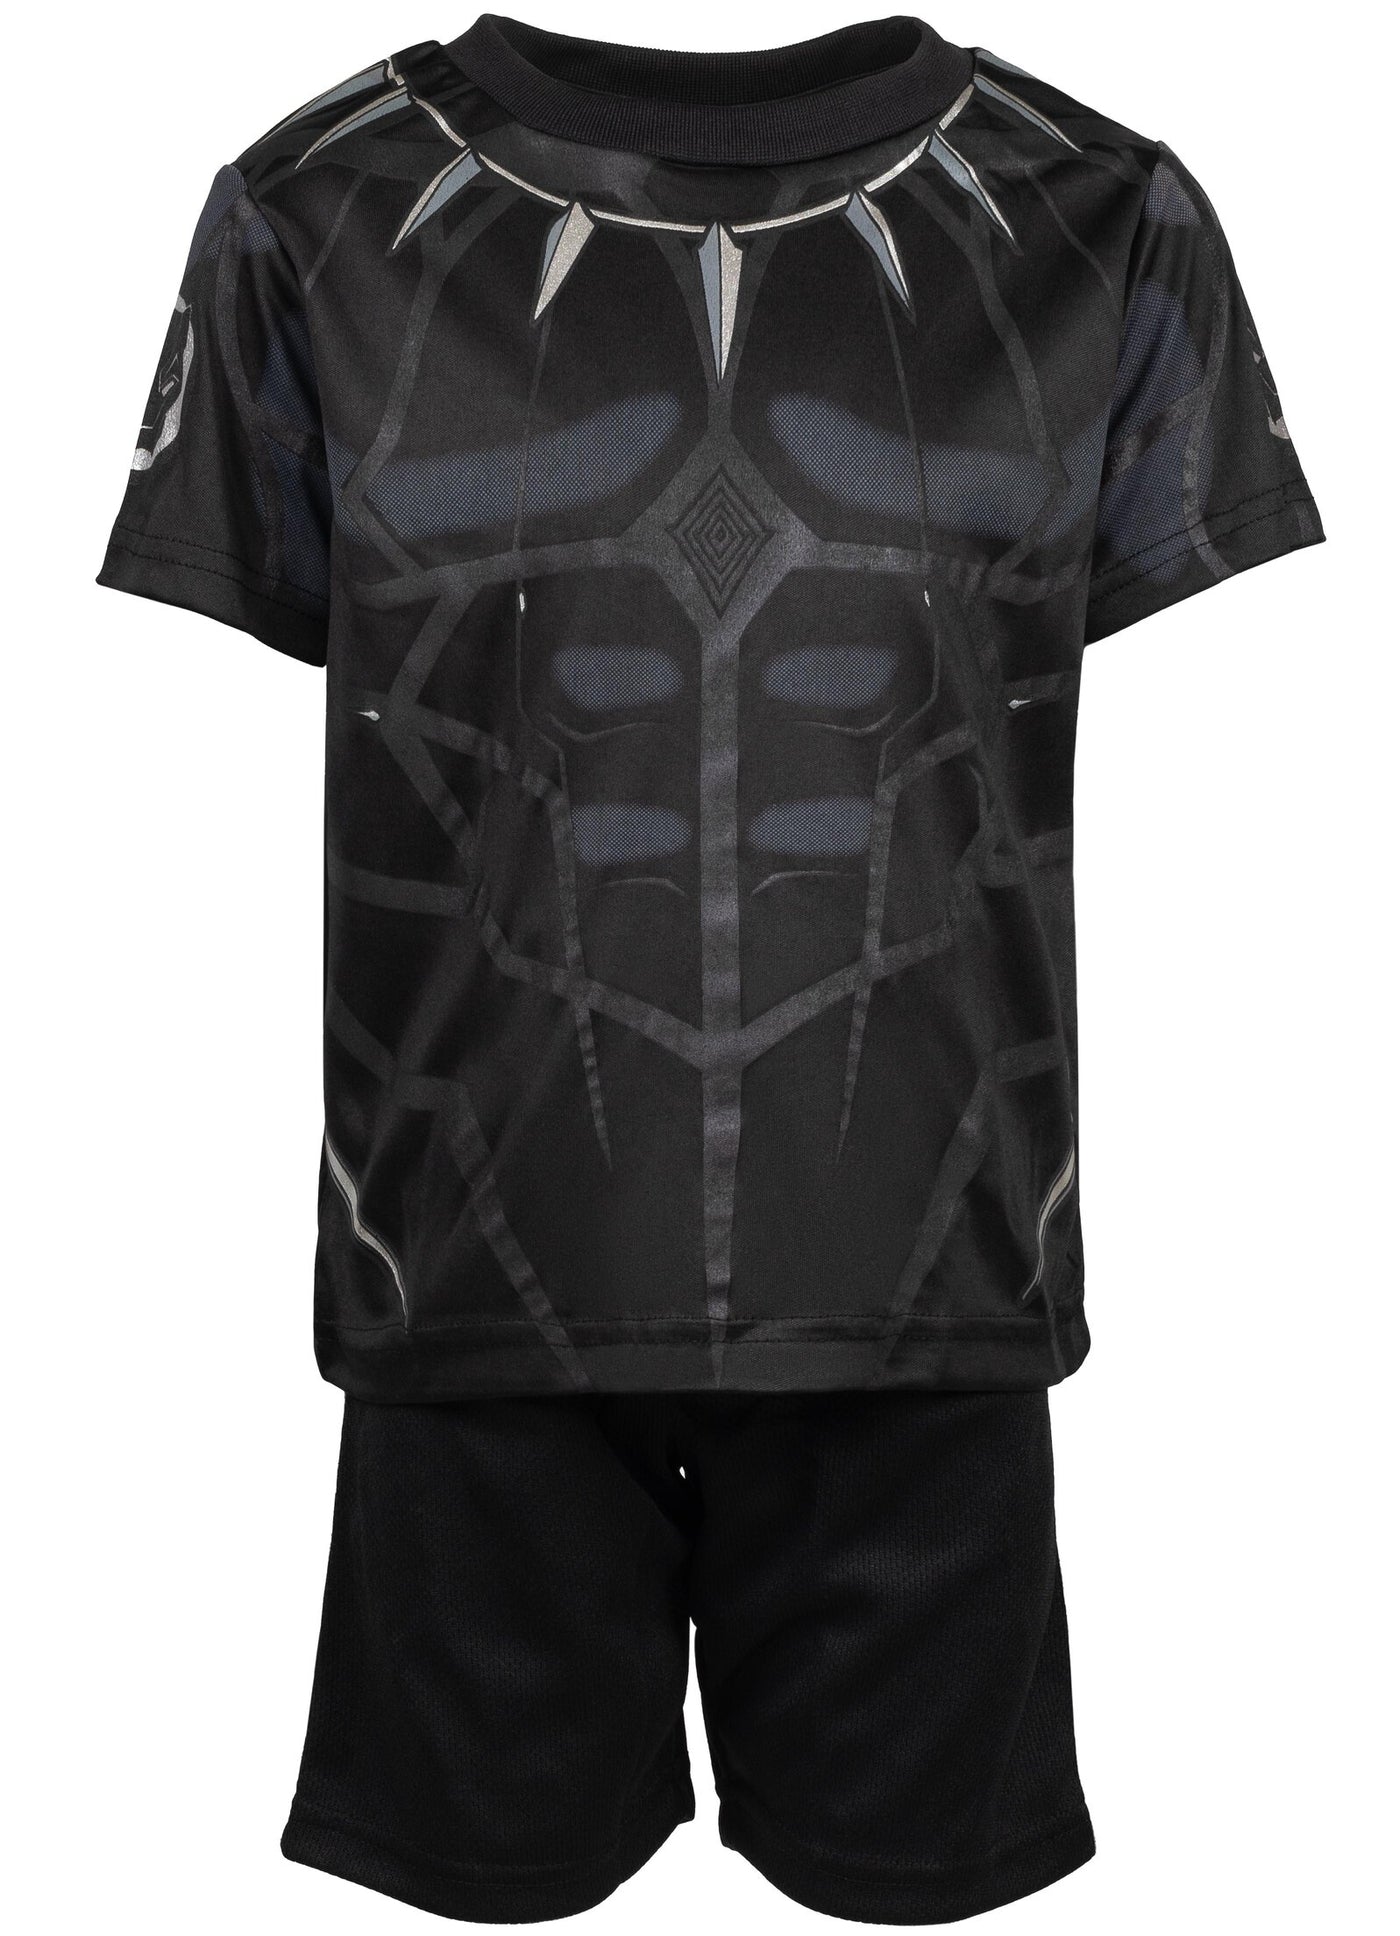 Marvel Avengers Black Panther Metallic Print Athletic T-Shirt and Shorts Outfit Set